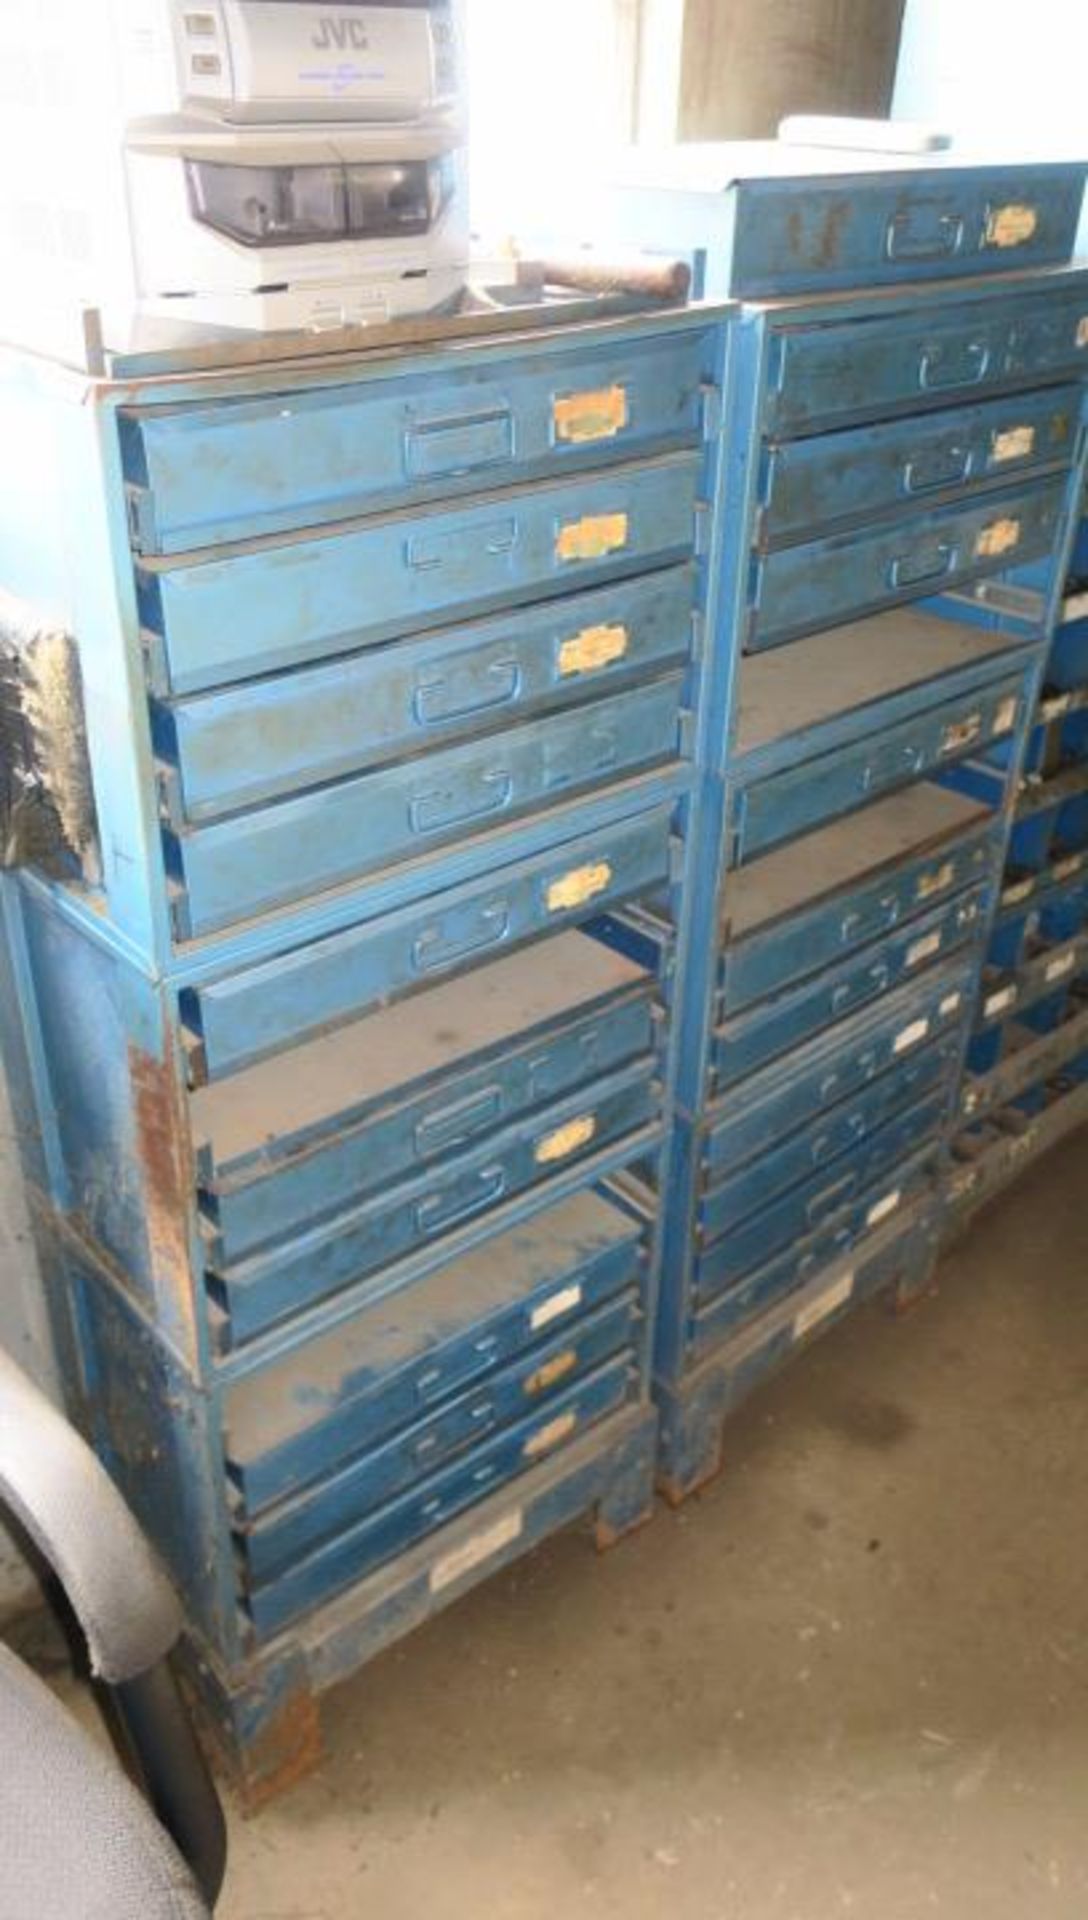 LOT CONSISTING OF: large selection of die parts including punches, inserts, dowel pins, etc. (top - Image 7 of 8